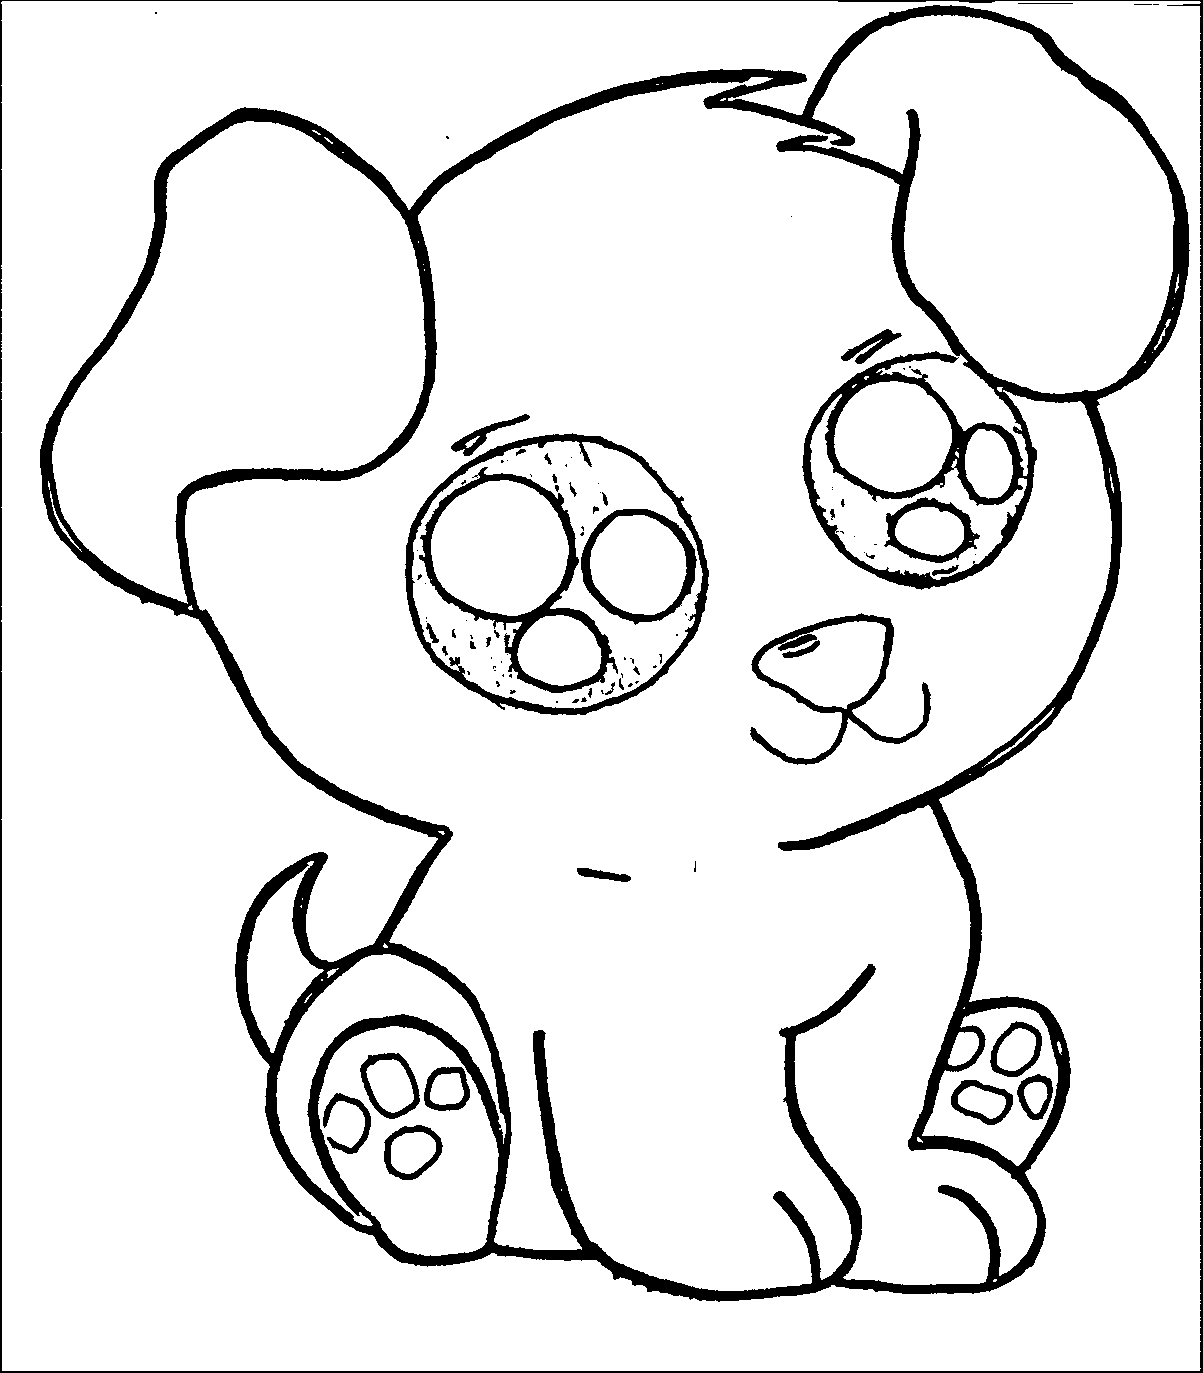 puppy coloring pages puppy dog coloring page free coloring pages and coloring coloring puppy pages 